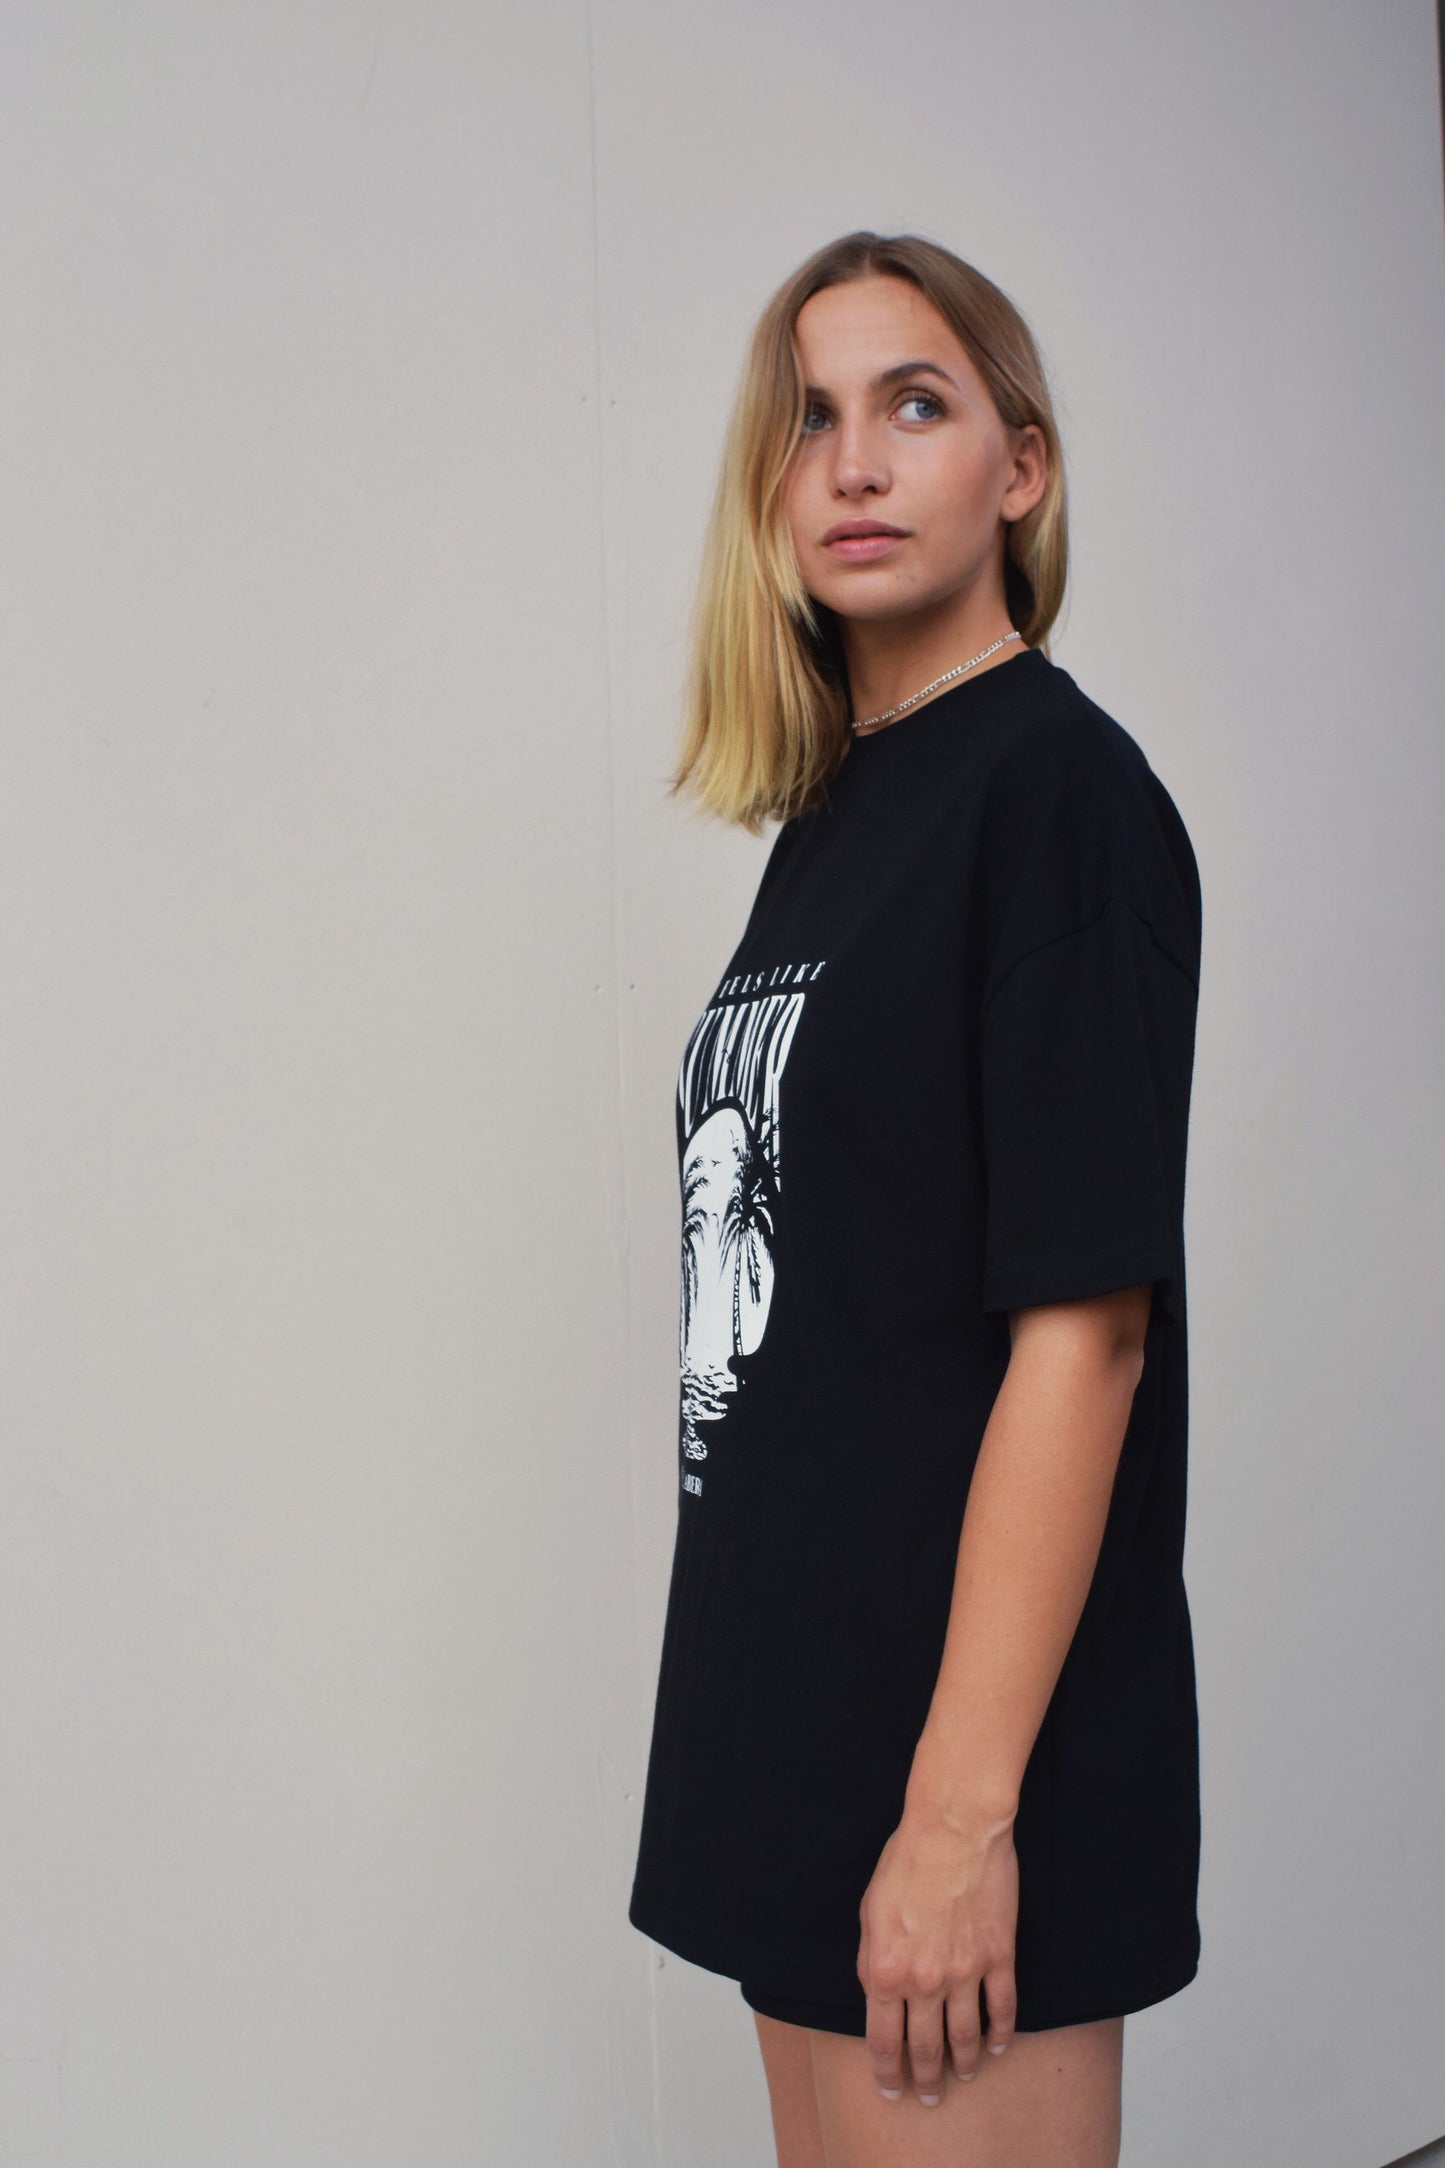 Female model wearing a Black oversize tshirt with round white summer design on the front 